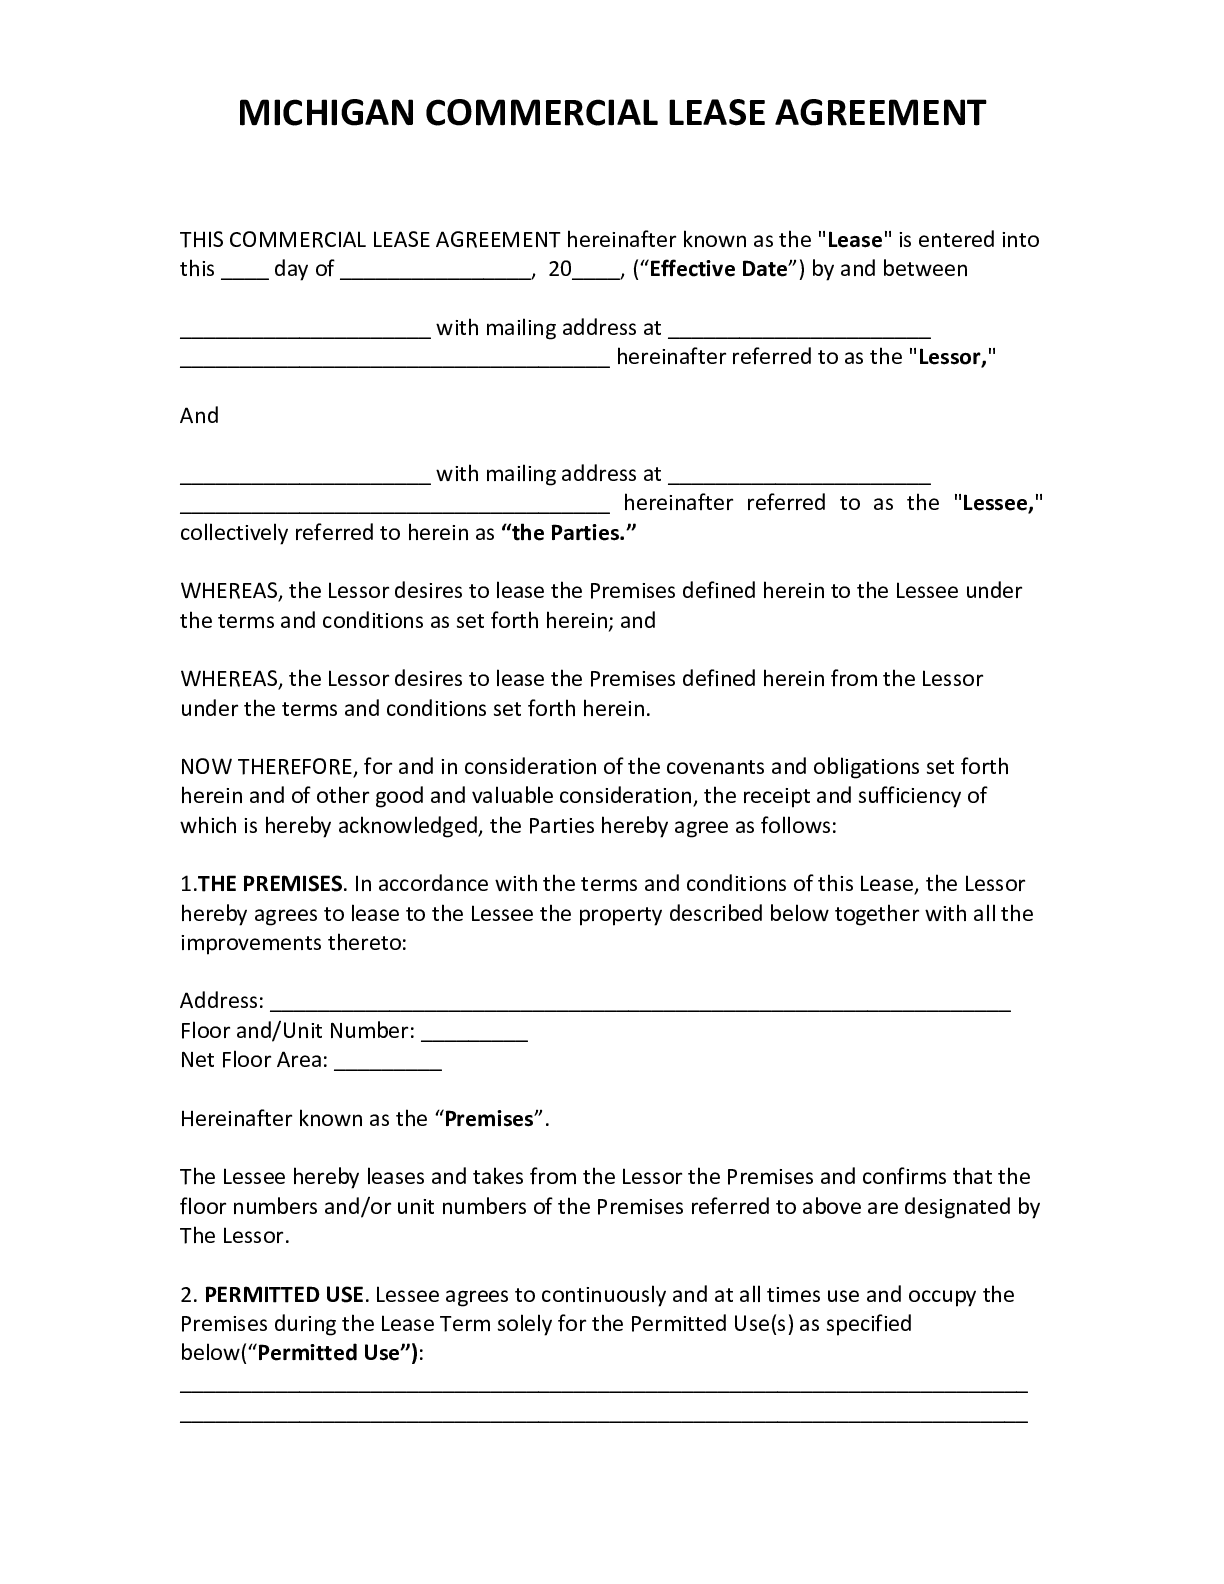 OFFICIAL Michigan Commercial Lease Agreement [20]  PDF Form For building rental agreement template